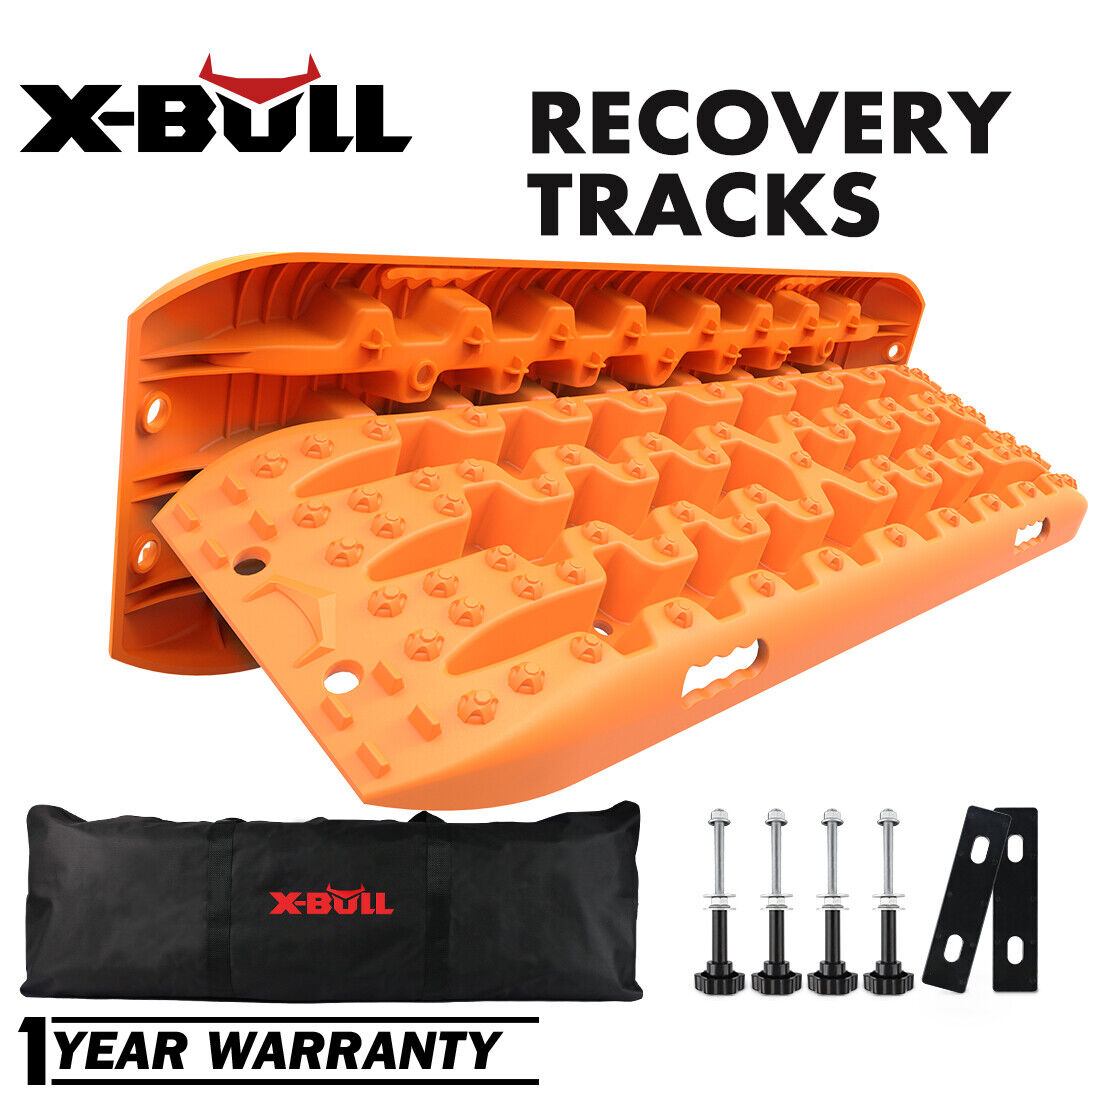 X-BULL GEN3.0 Recovery Tracks Sand Tracks Traction Boards Snow OffRoad Orange